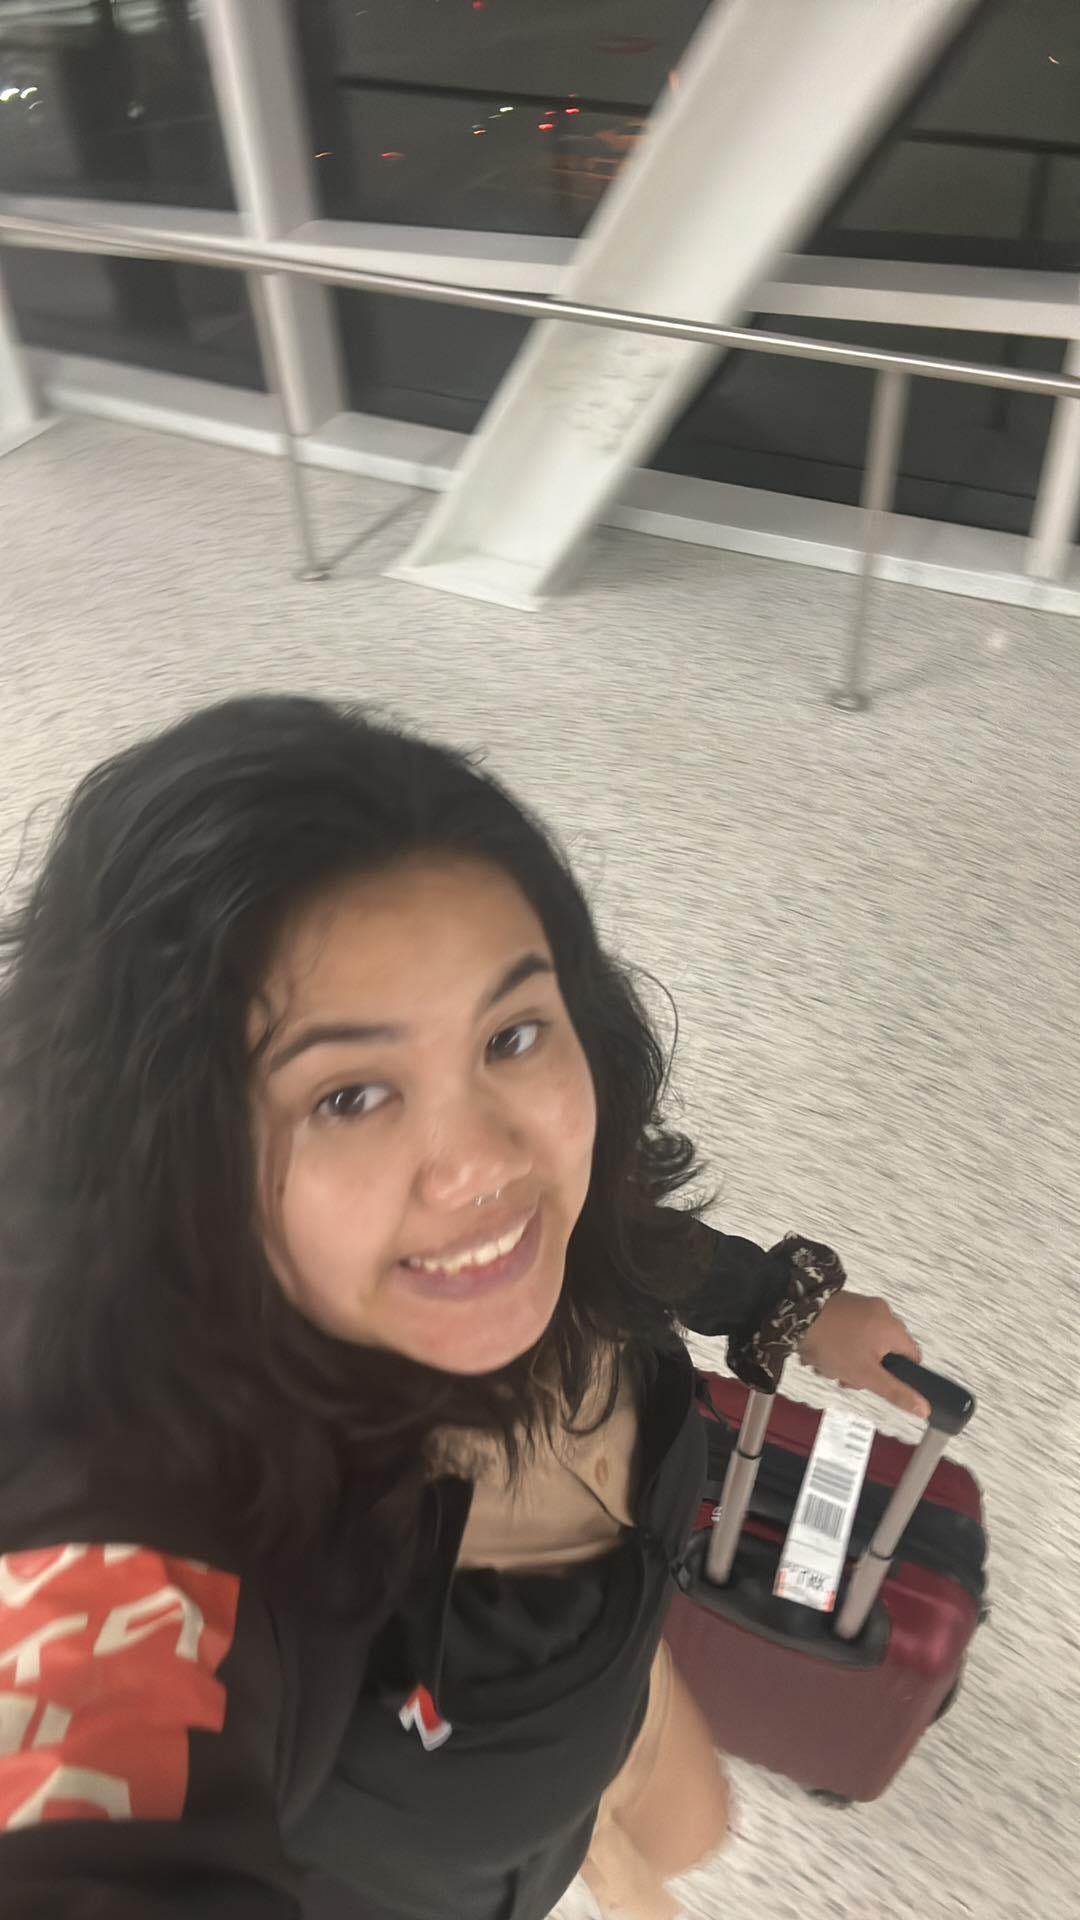 cami (young 21 year old woman with messy brown hair) grinning anxiously at the camera with her luggage